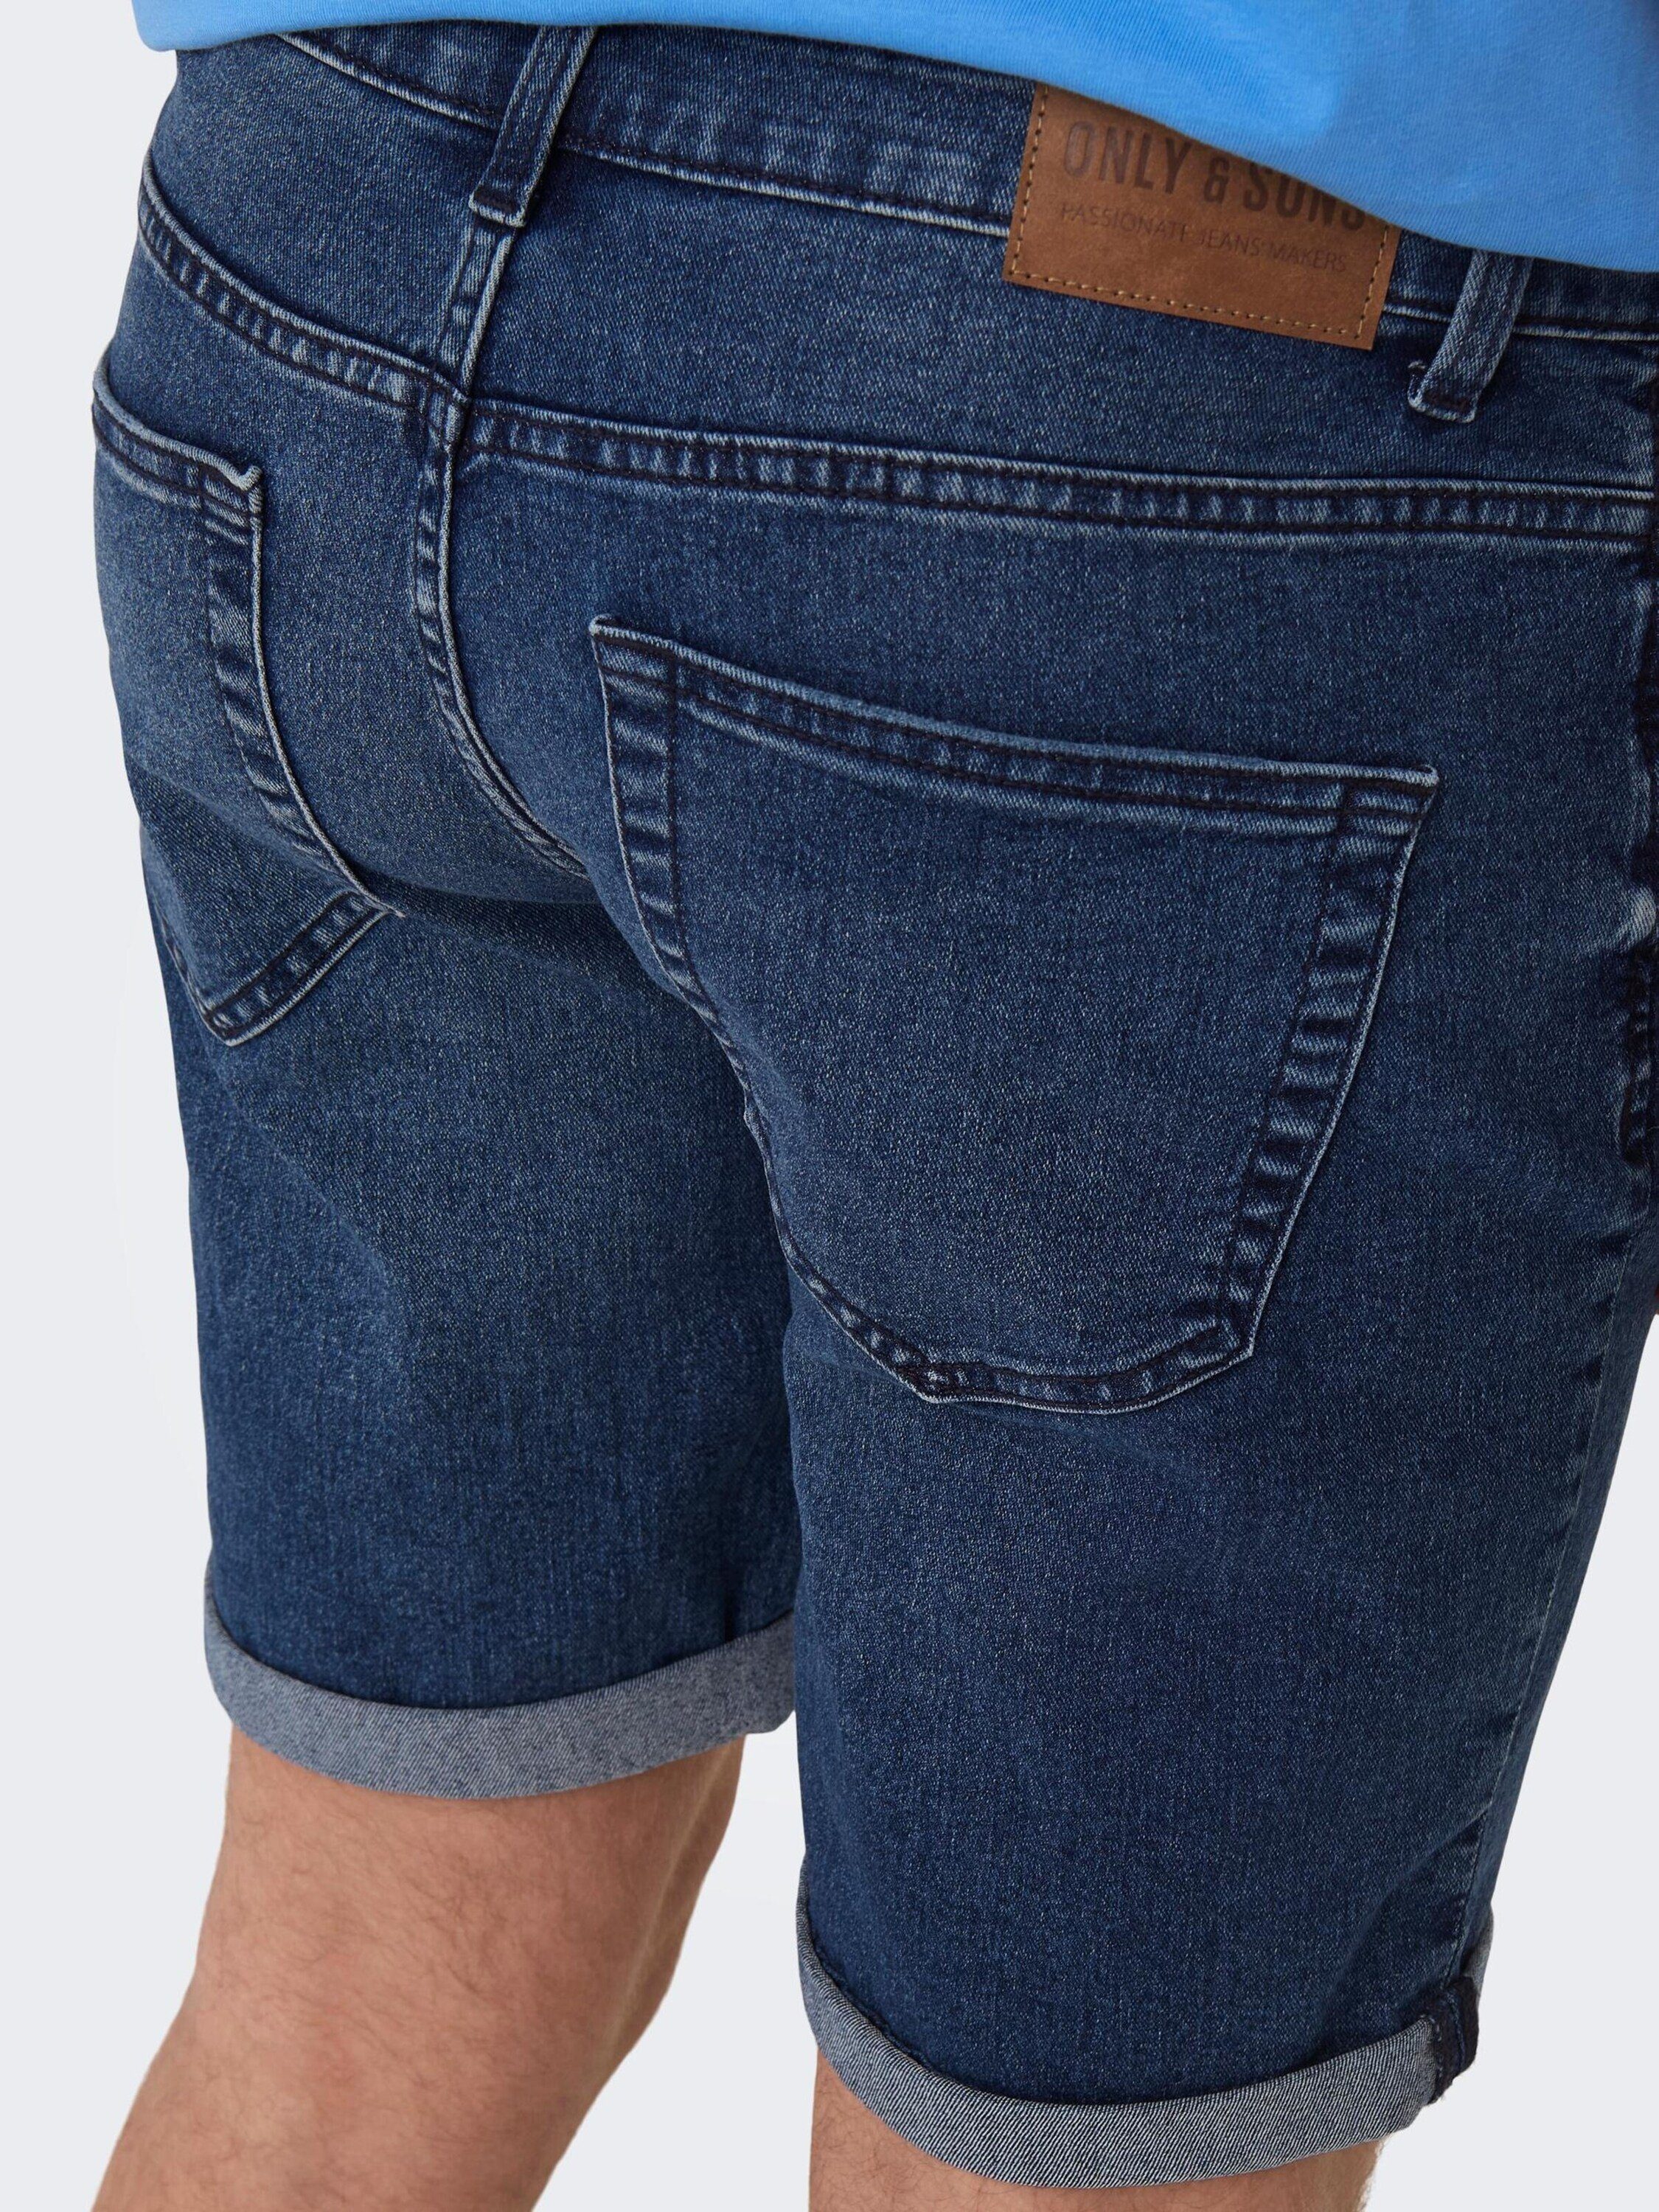 Ply & SONS ONLY Jeansshorts (1-tlg)